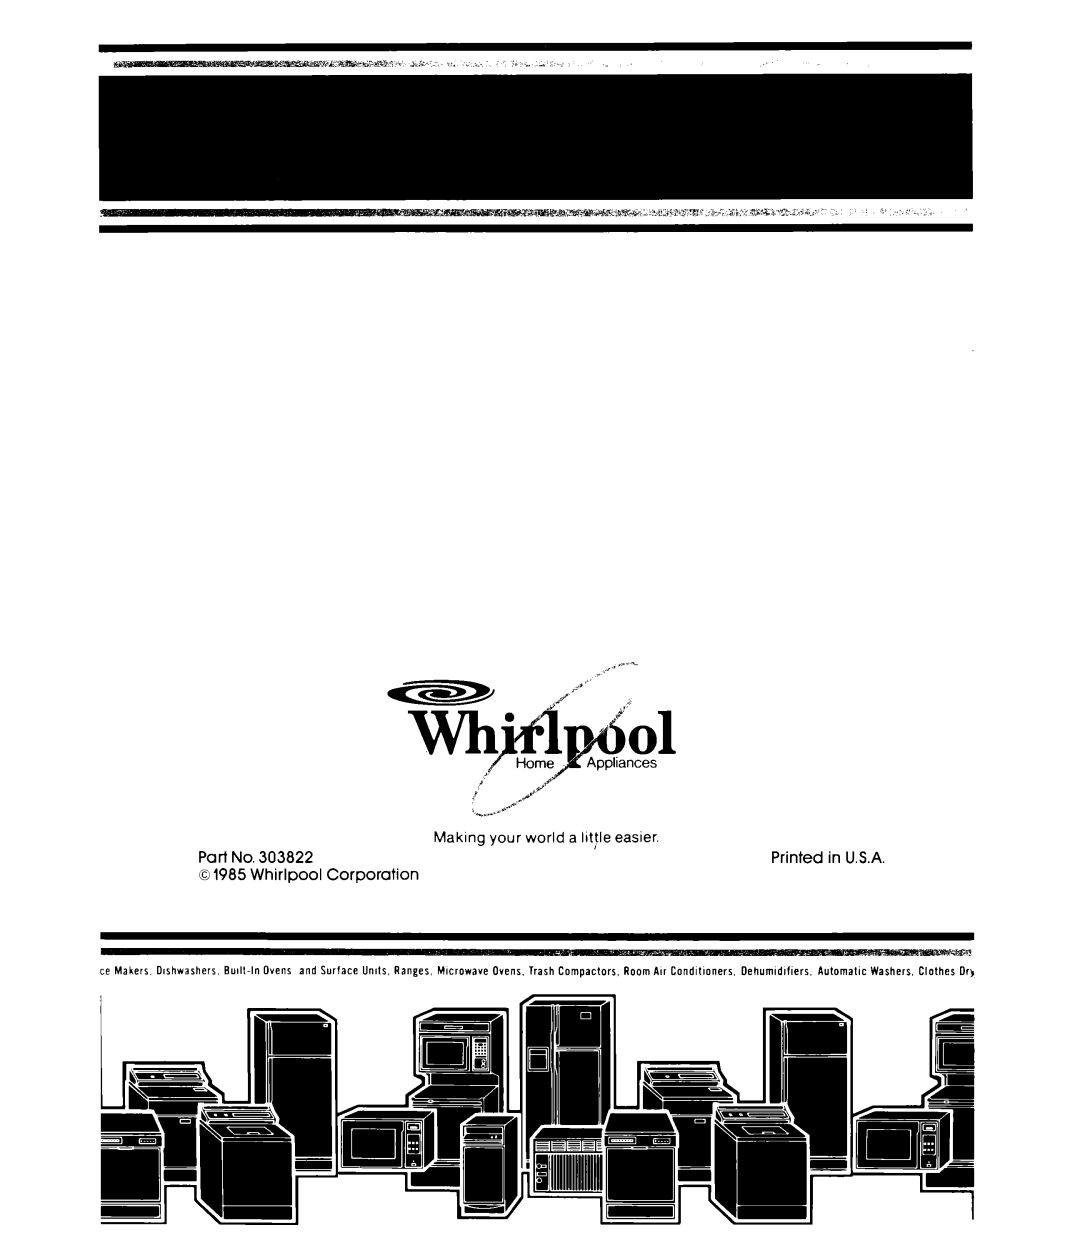 Whirlpool DU5504XM manual Maklng your world a lit le, easier, Part, 303822, Printed, in U.S.A, Corporation, Whirlpool 